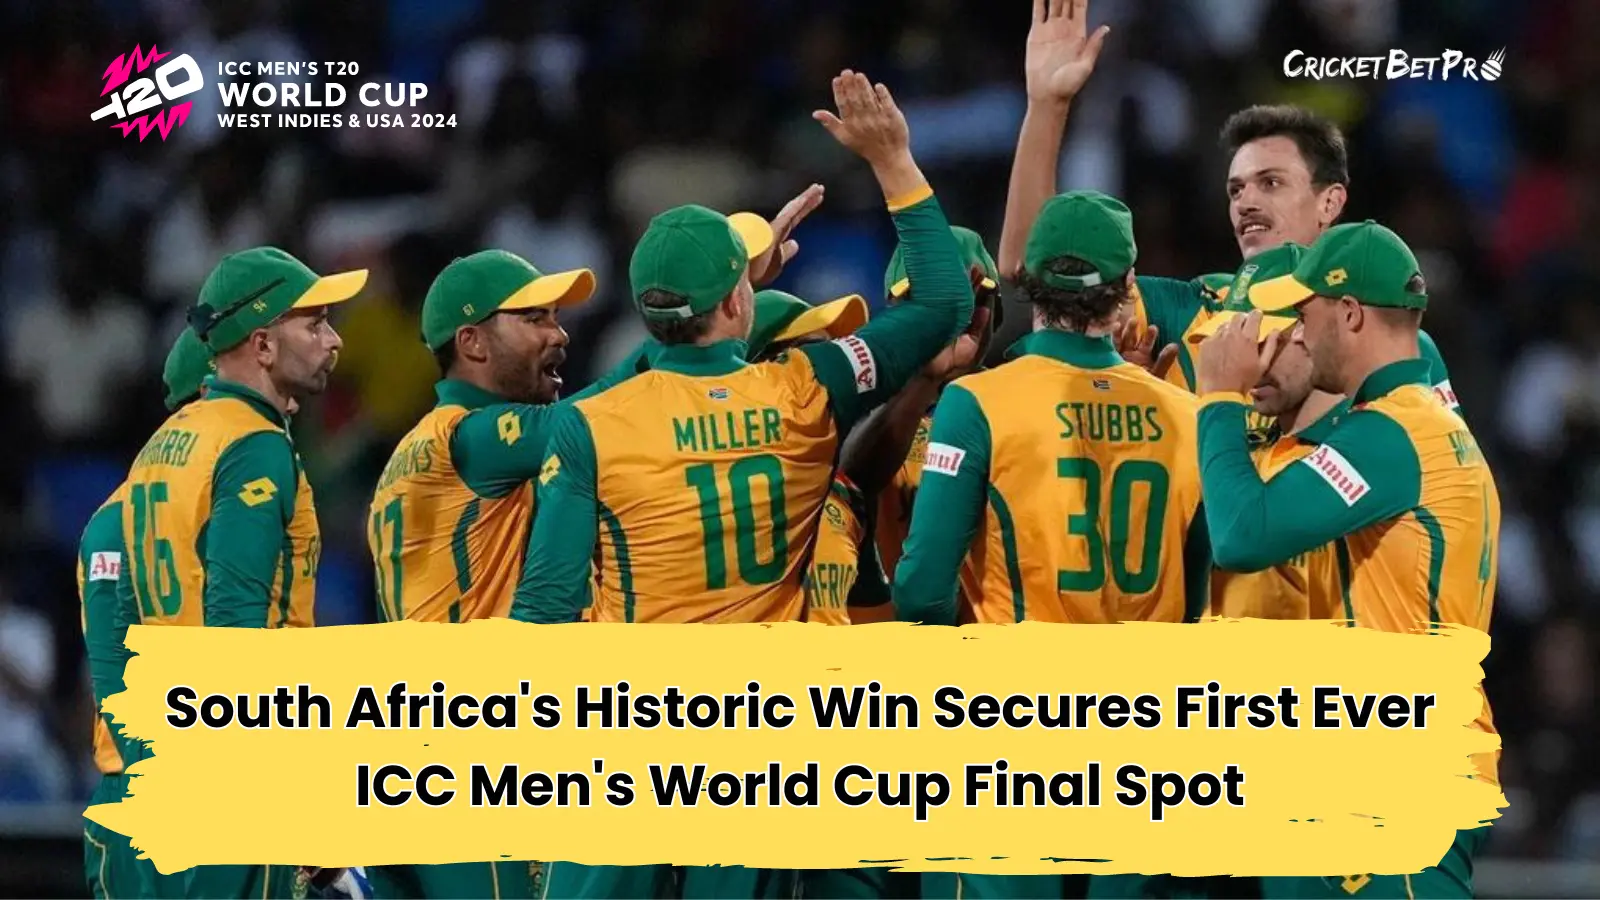 South Africa's Historic Win